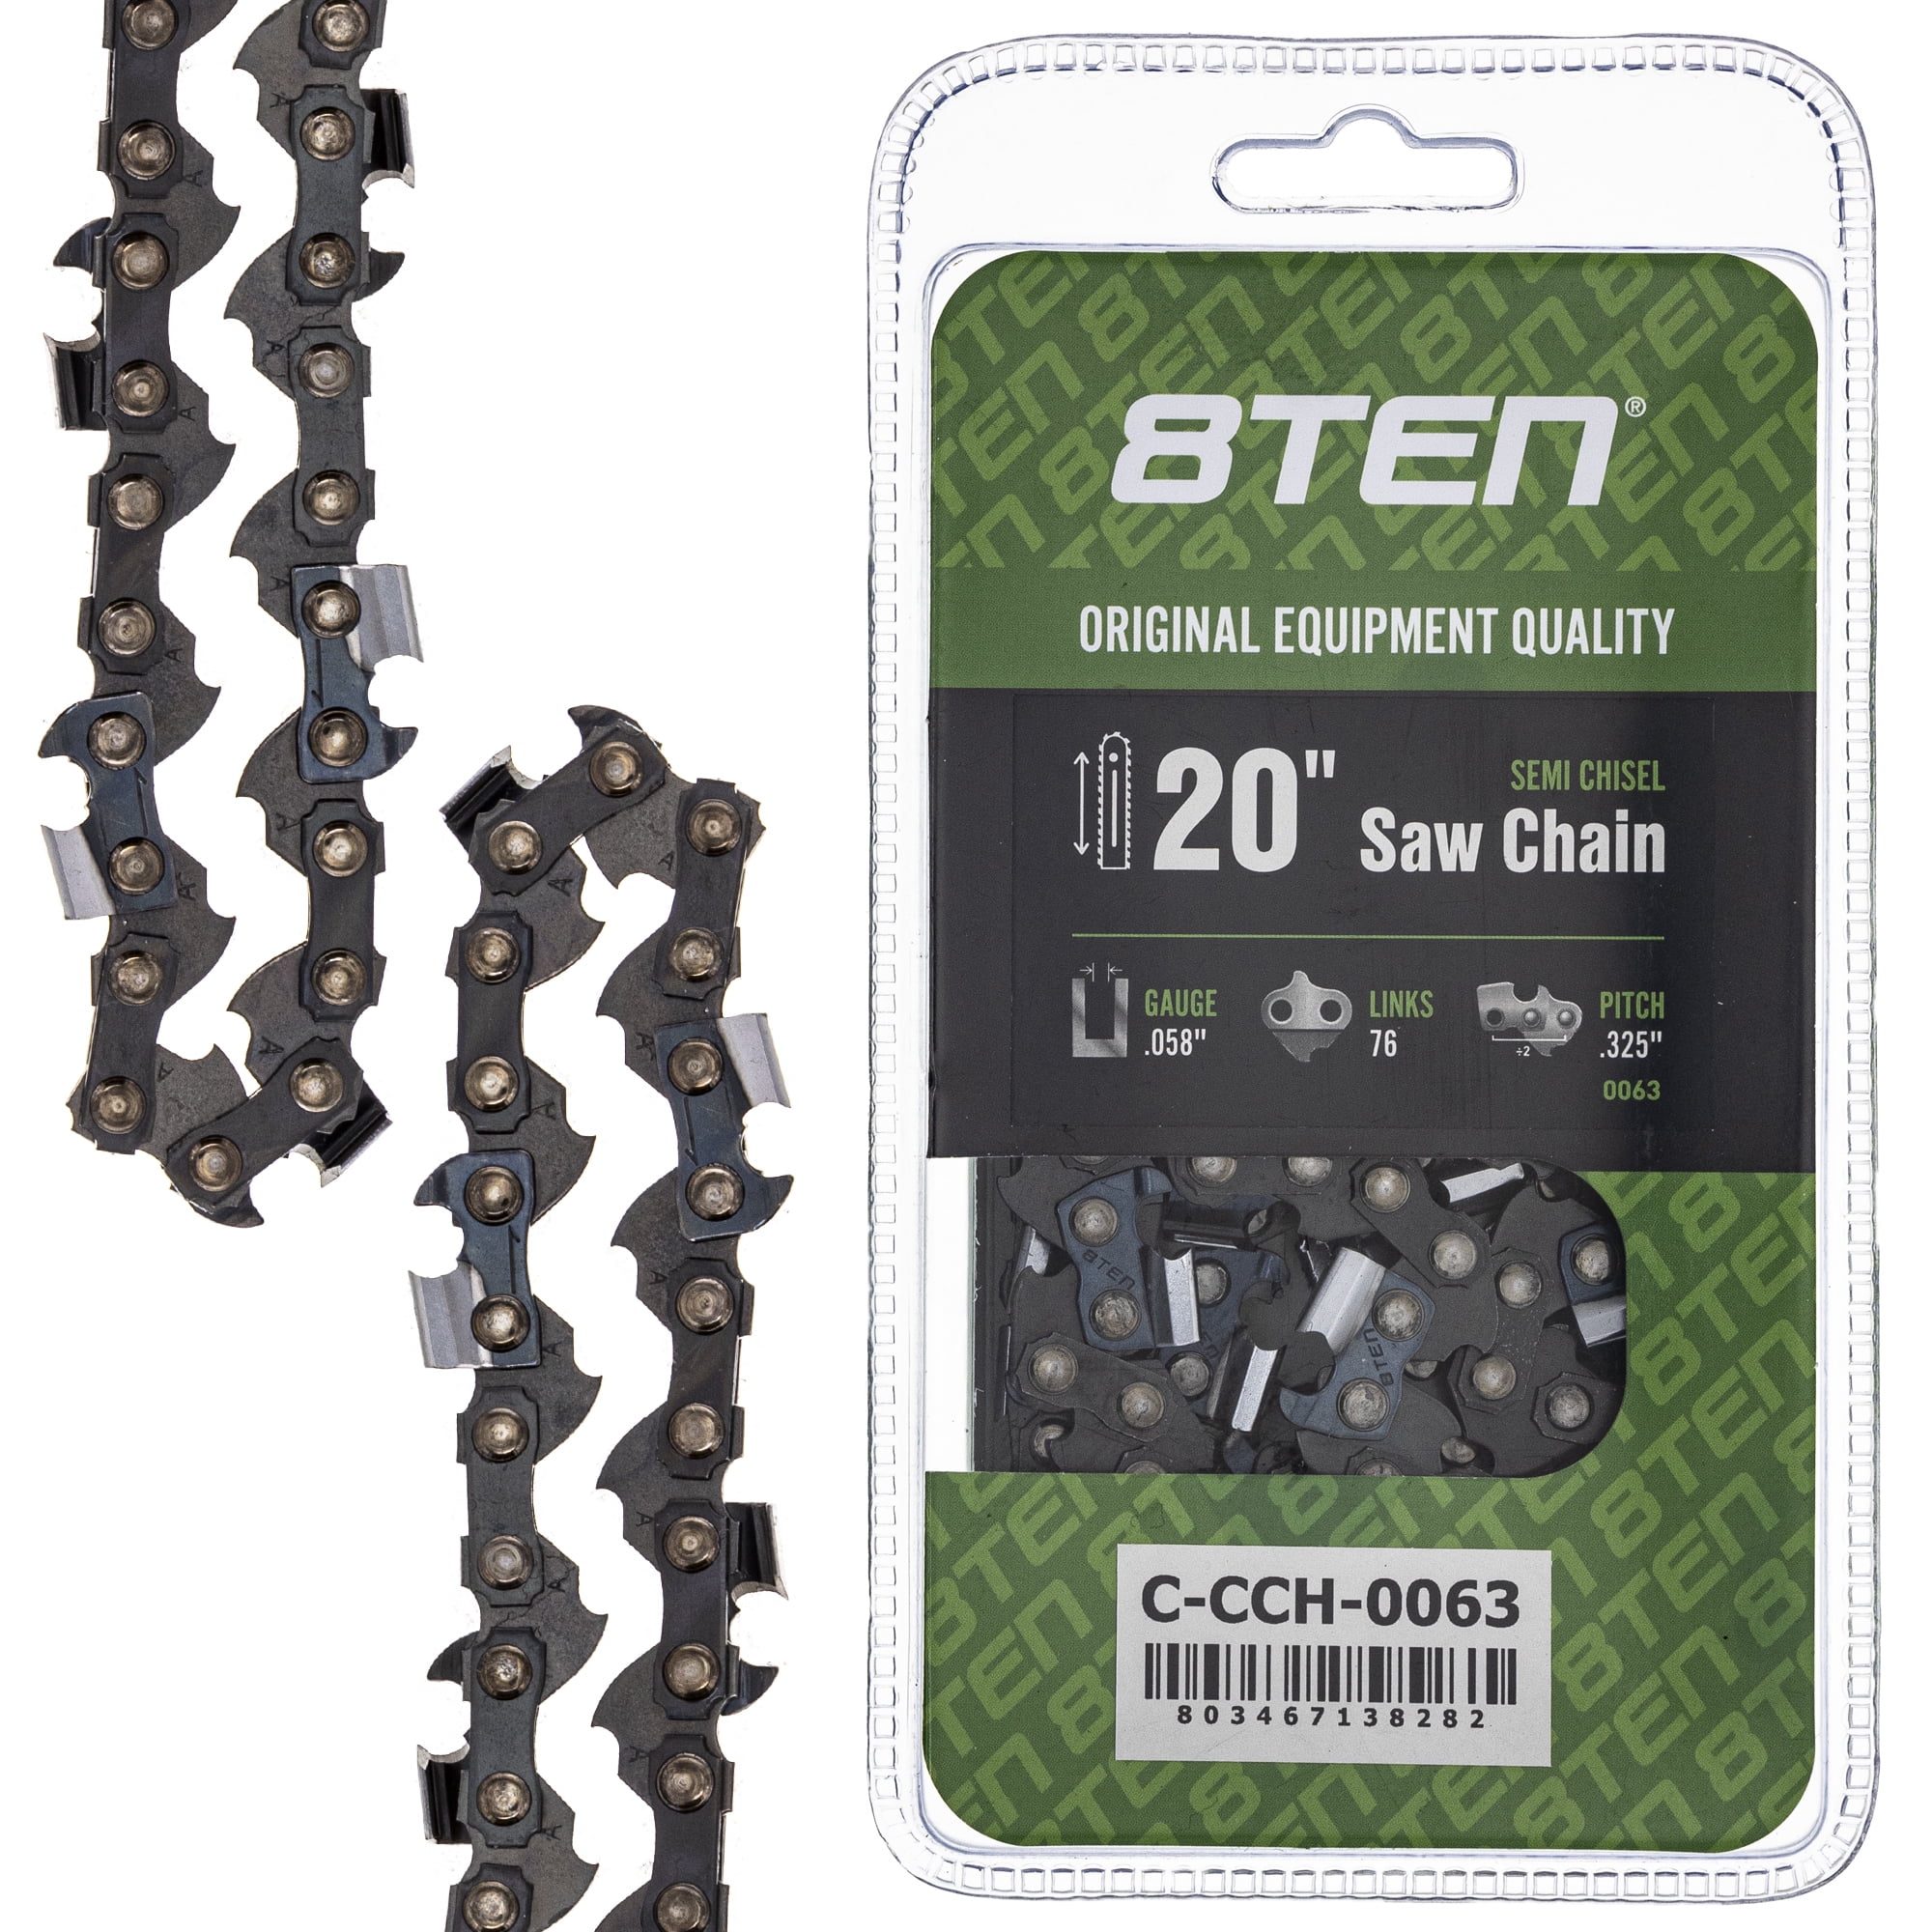 029-0.325" 0.063" 74 DL 18" Semi Chisel Chainsaw Chain for Stihl MS290 